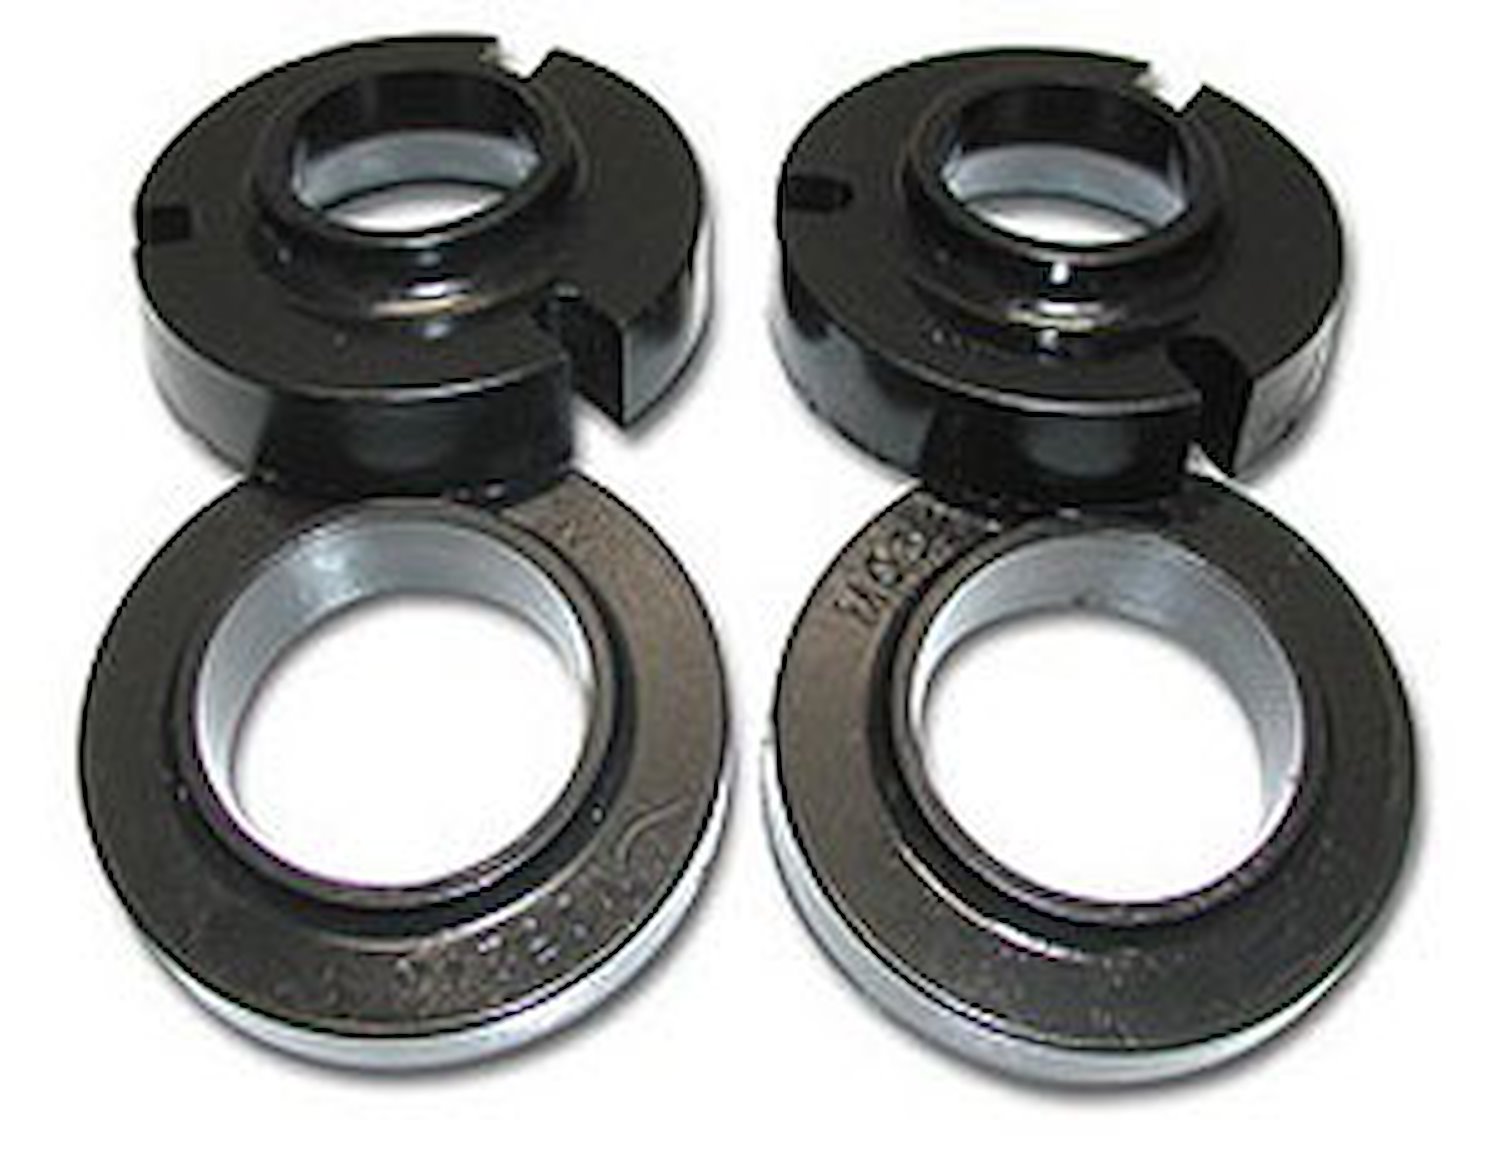 Leveling Kit 1995-2004 Prerunner 2WD and Tacoma 4WD Front: 2"